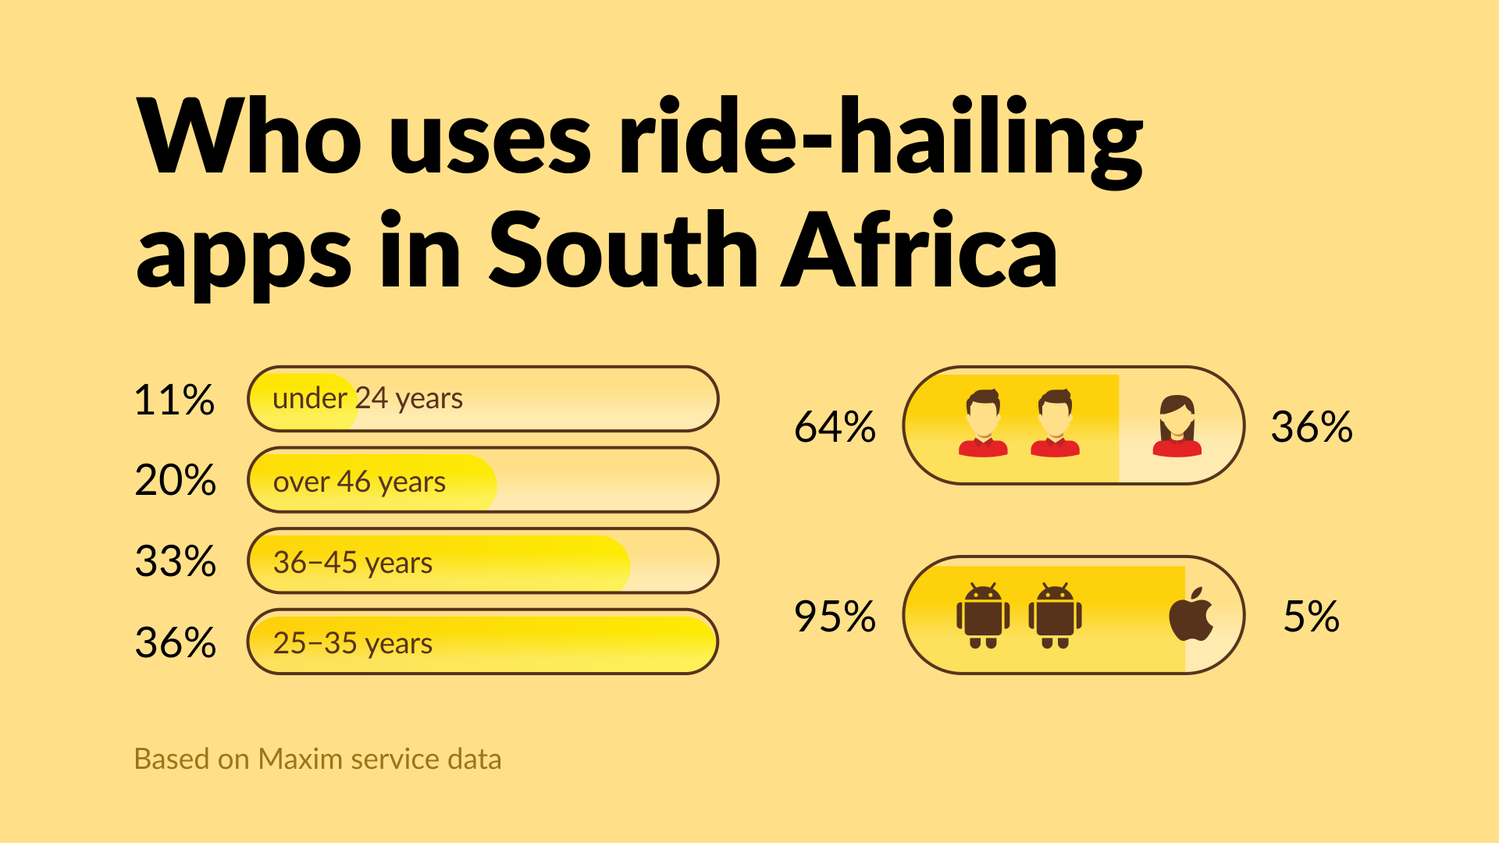 The portrait of ride-hailing app user in South Africa